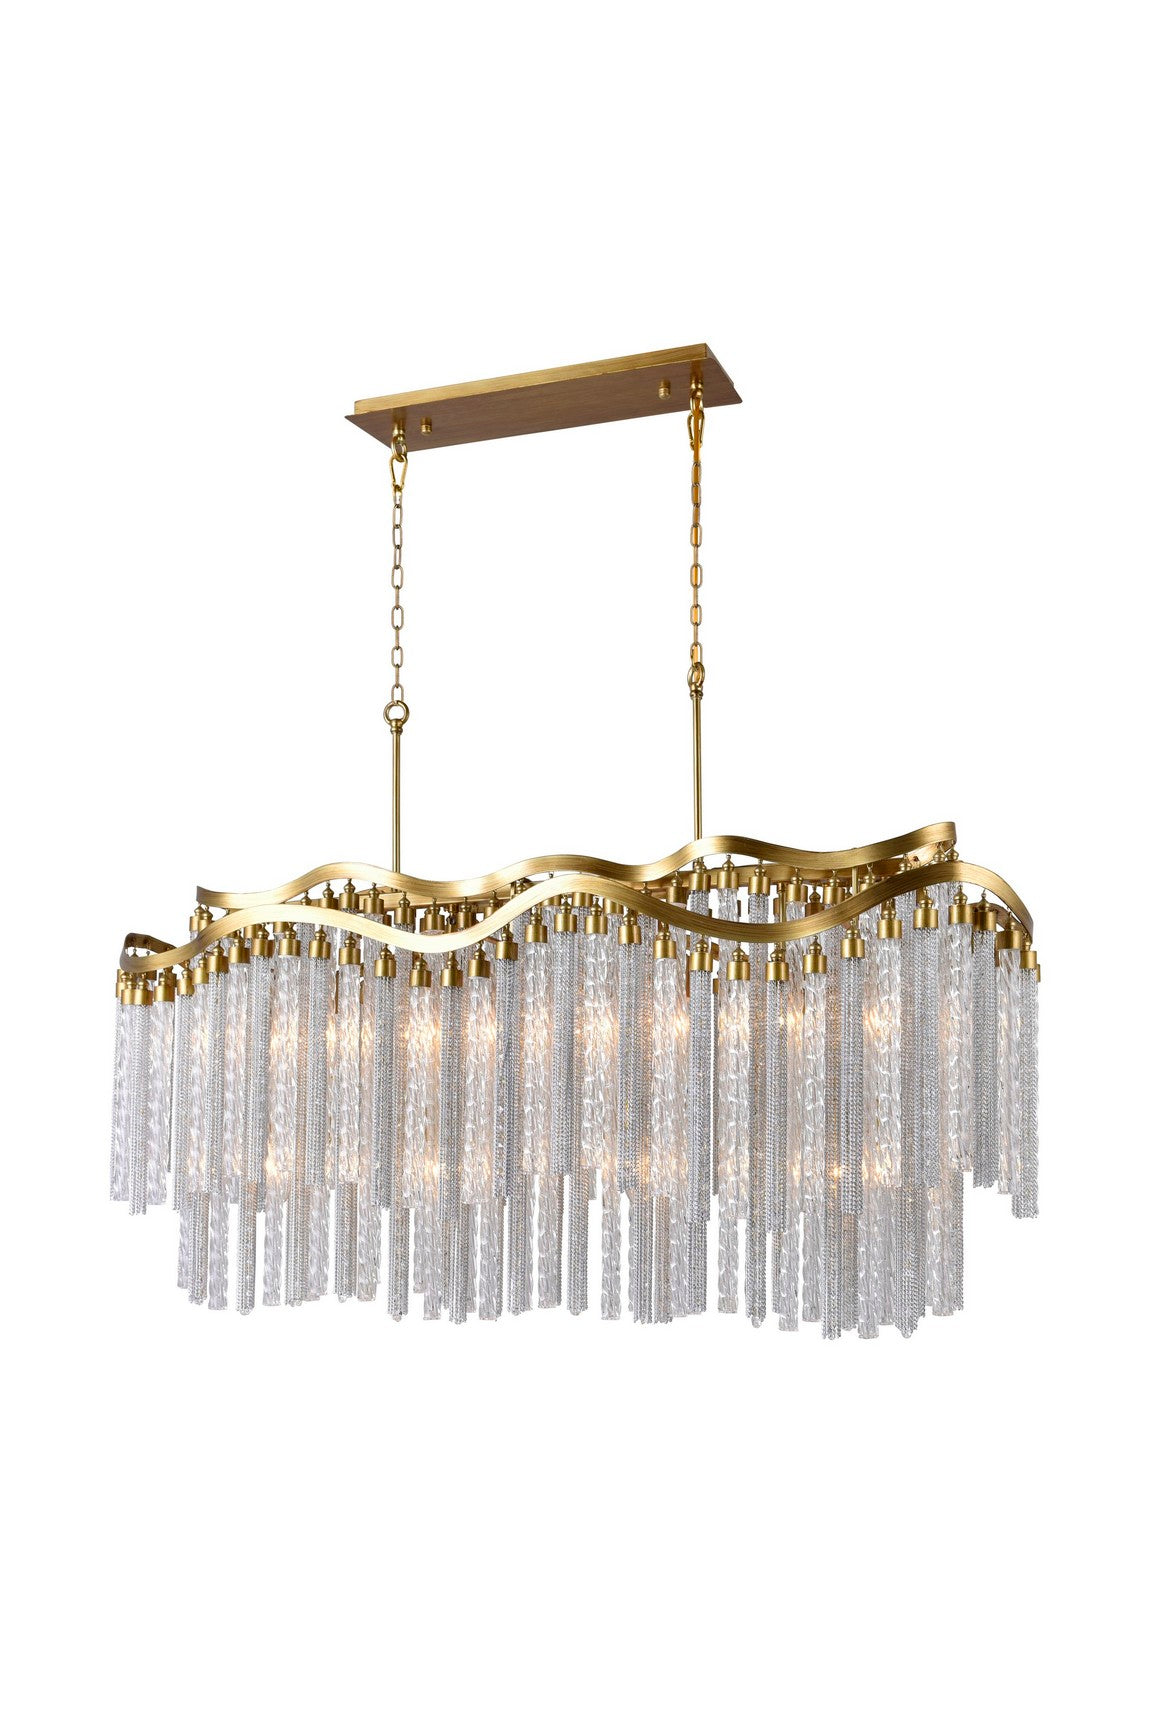 12 LIGHT DOWN CHANDELIER WITH GOLD FINISH - Dreamart Gallery